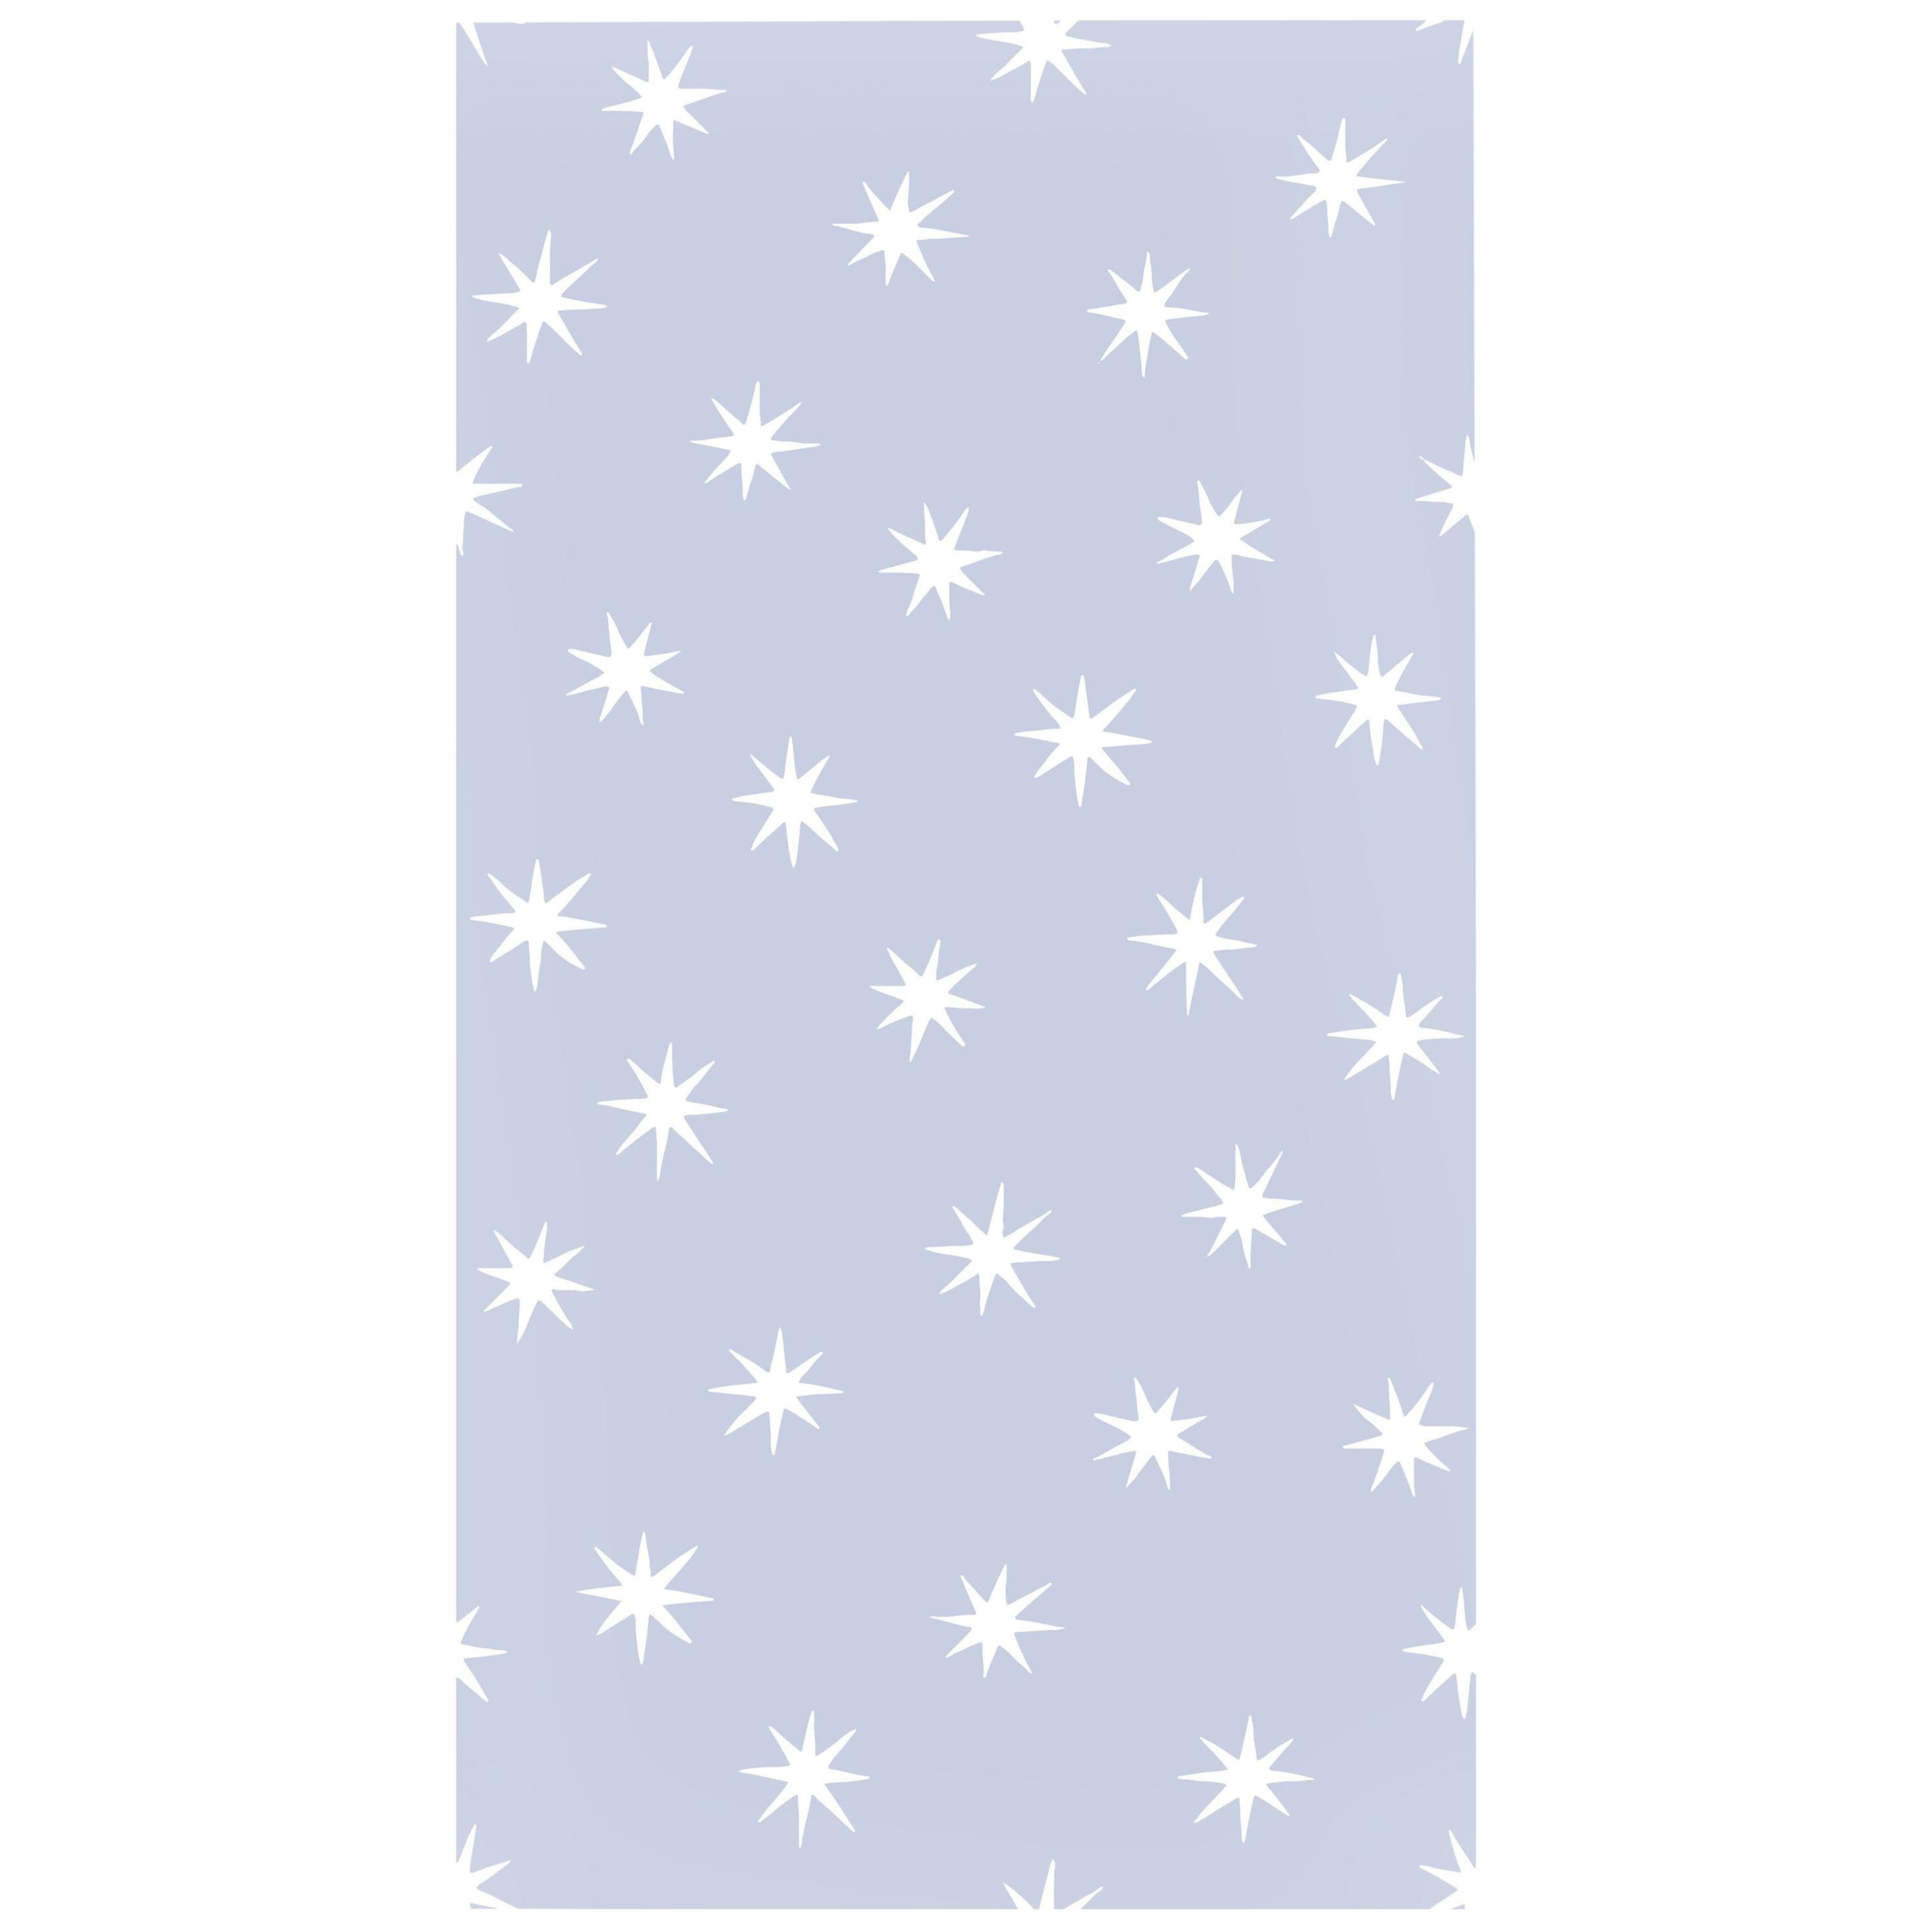 Stars in Zen Blue on Smooth Wallpaper For Sale